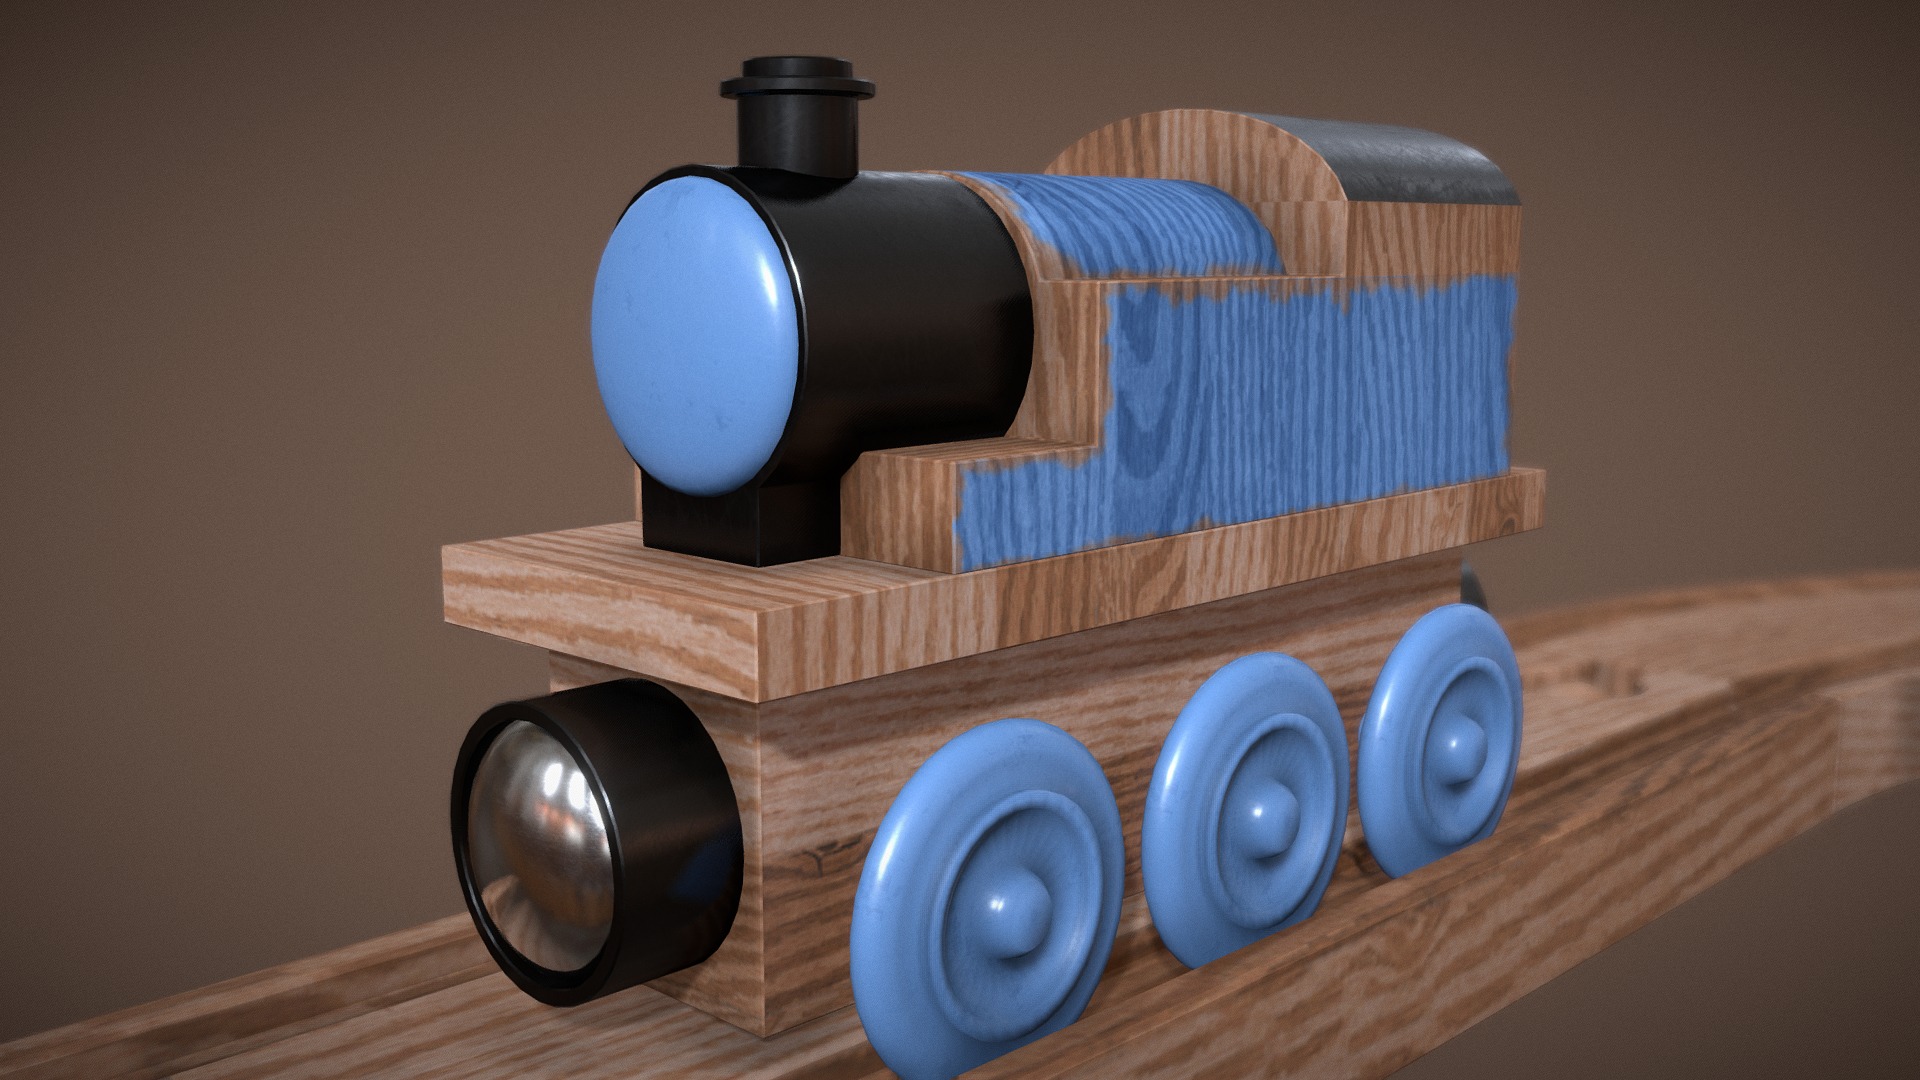 3D model Toy train - This is a 3D model of the Toy train. The 3D model is about a stack of blue and white cylindrical objects on a wooden surface.